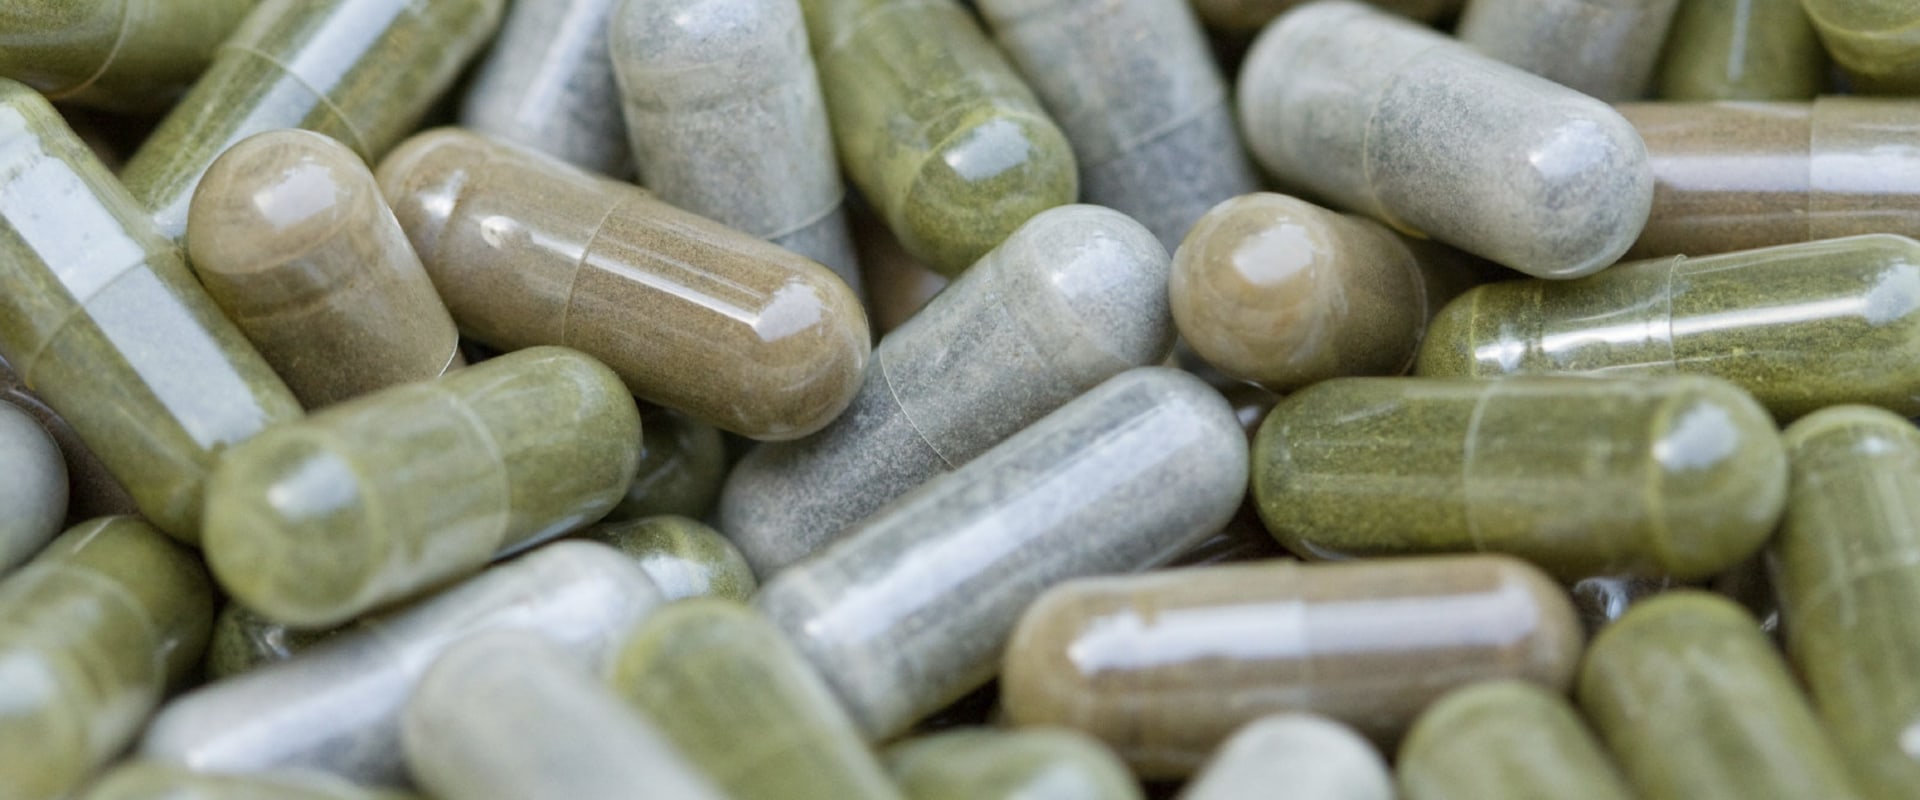 Is Food Supplements Harmful to Health? - An Expert's Perspective